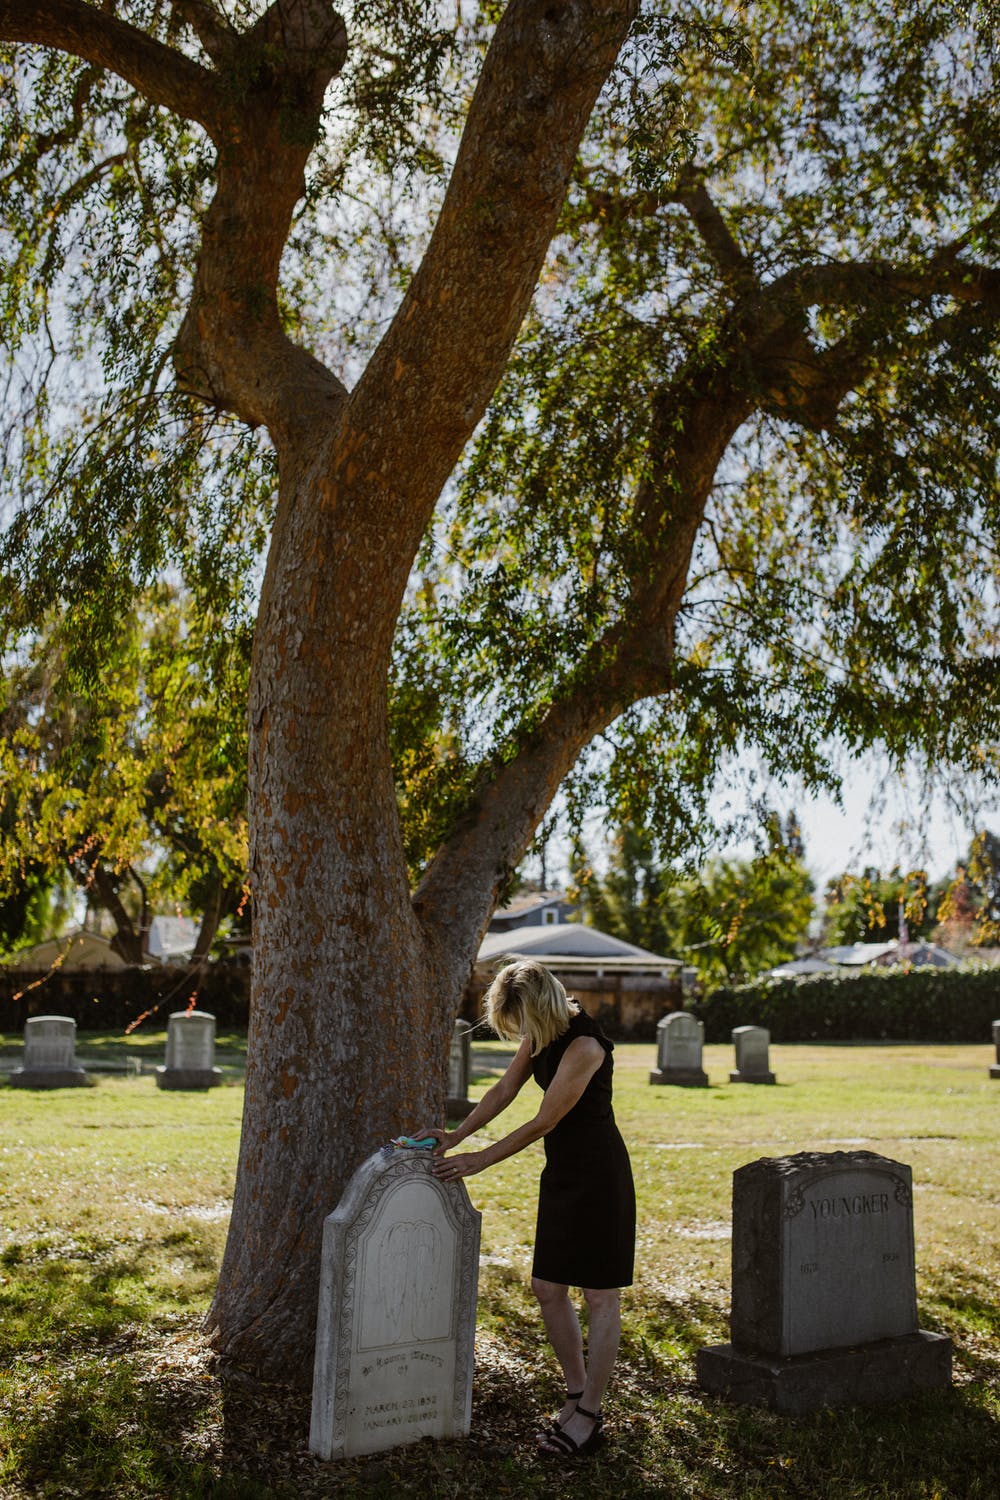 Gary saw a woman standing by his mother's grave | Source: Pexels